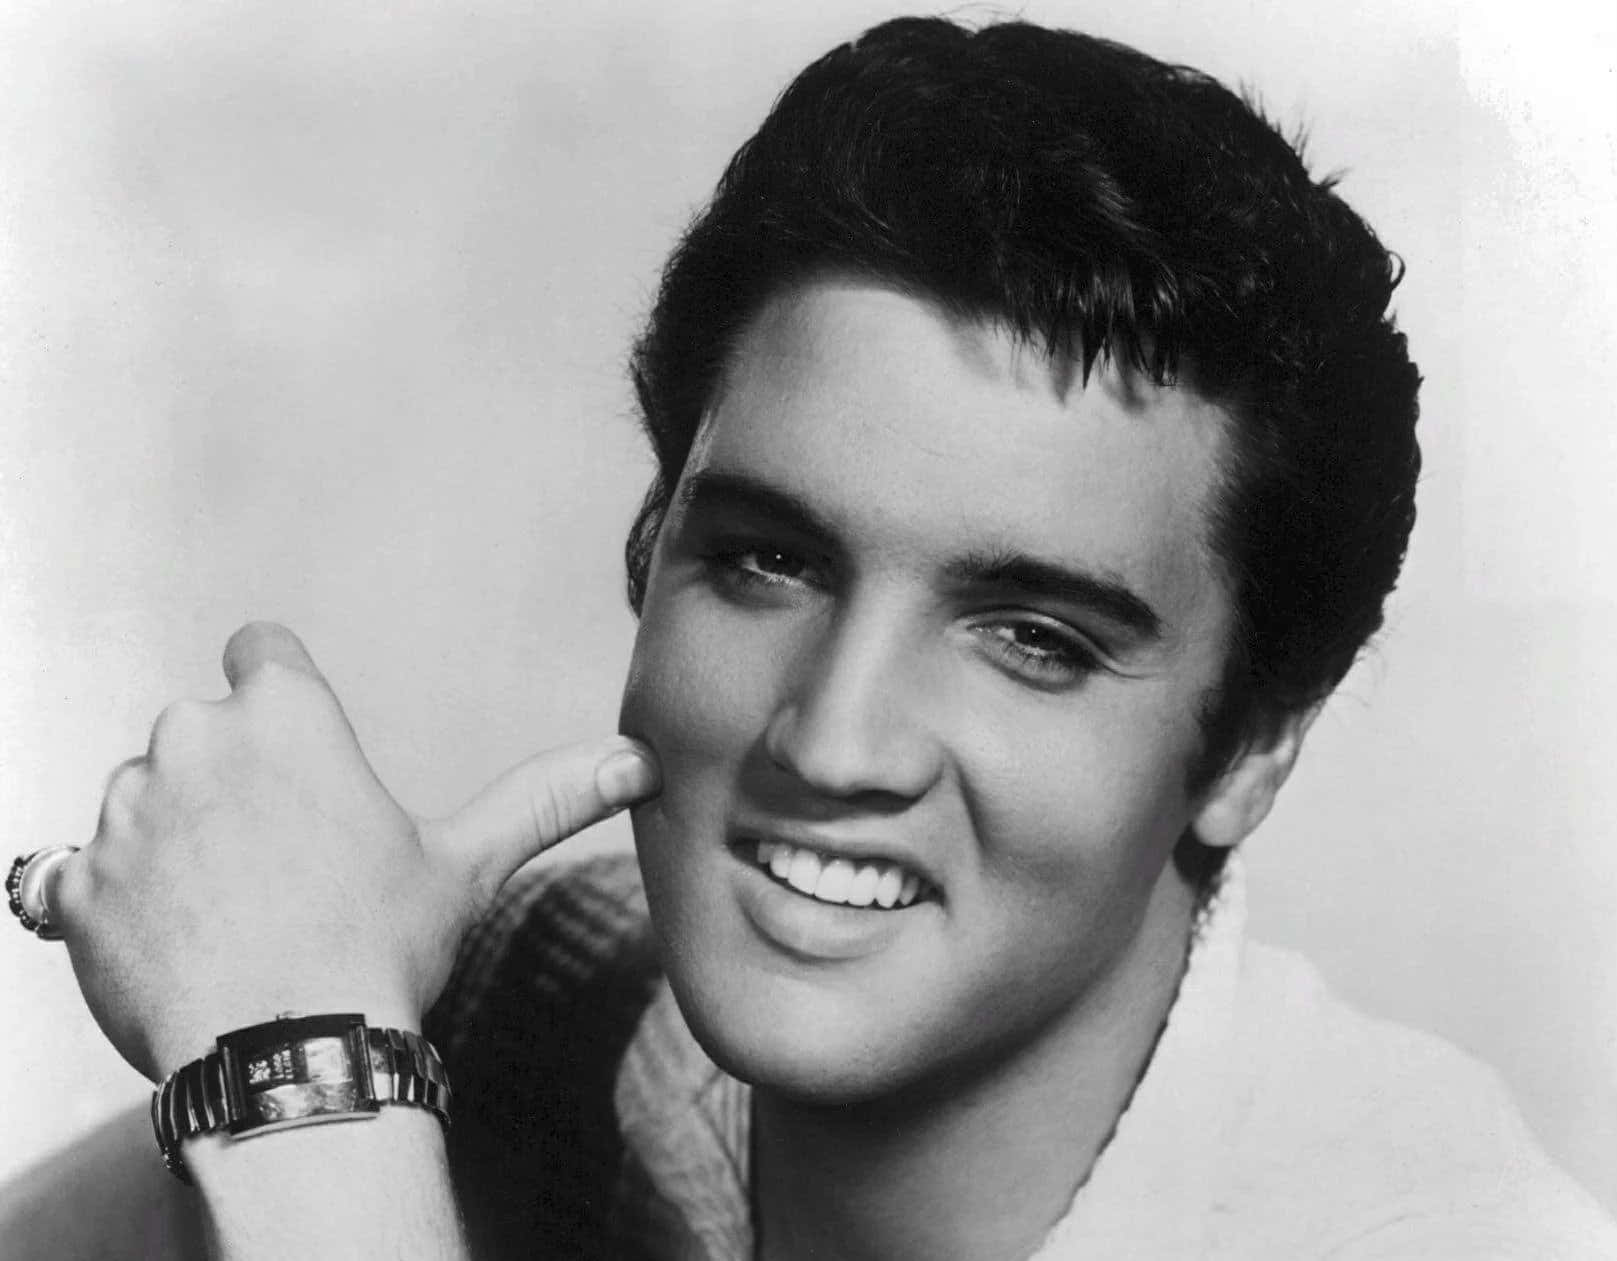 Elvis Presley Is Smiling In A Black And White Photo